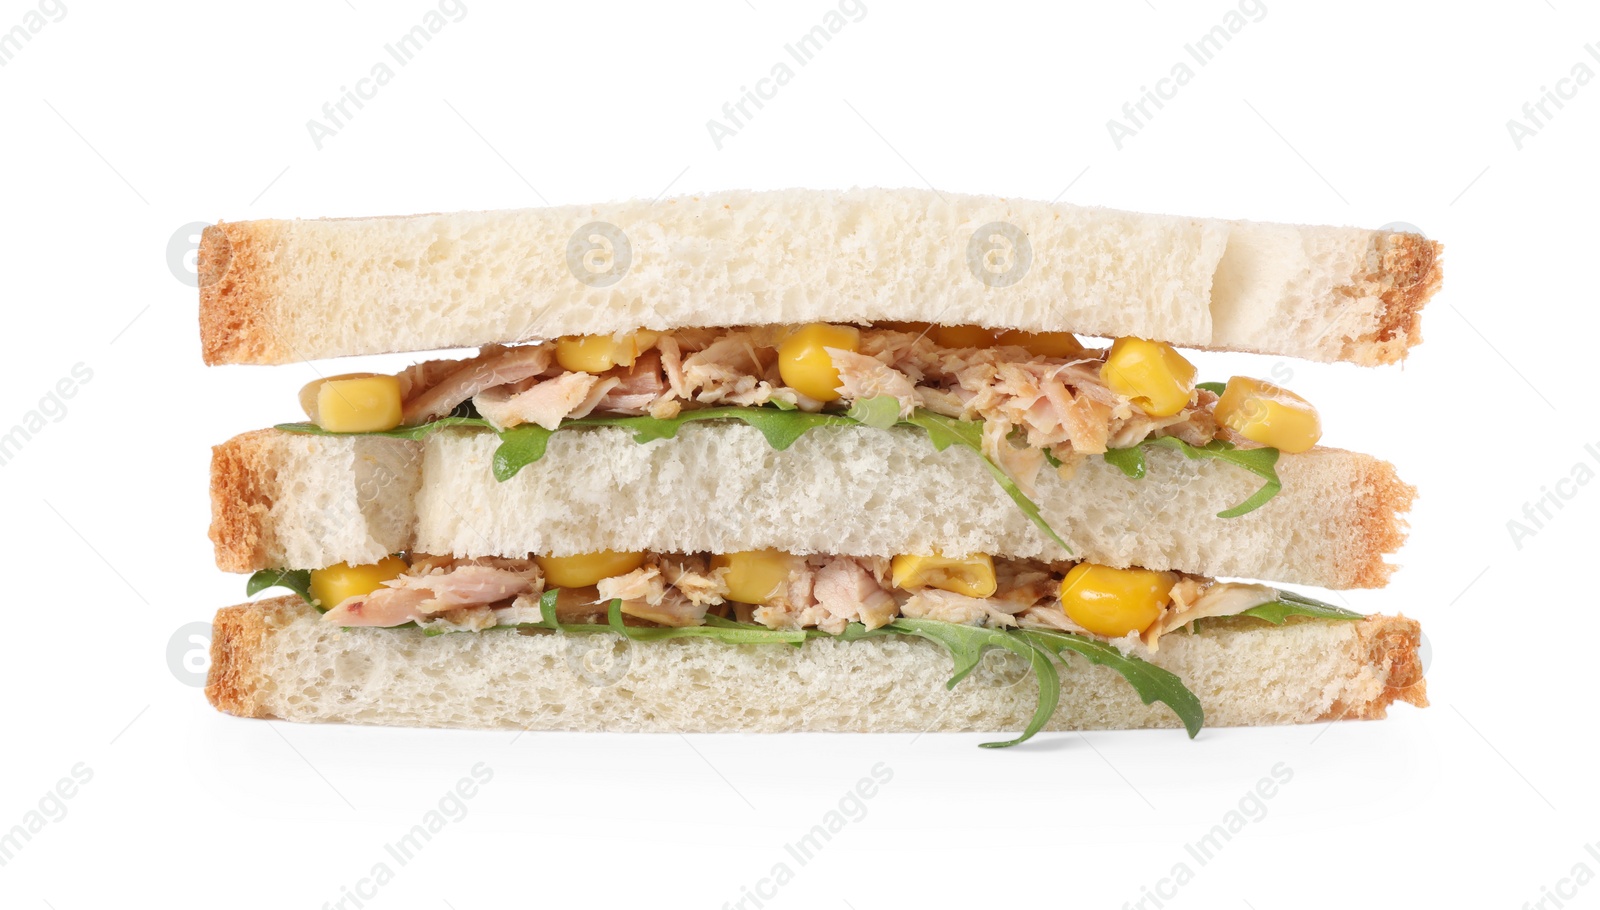 Photo of Delicious sandwich with tuna, corn and greens on white background